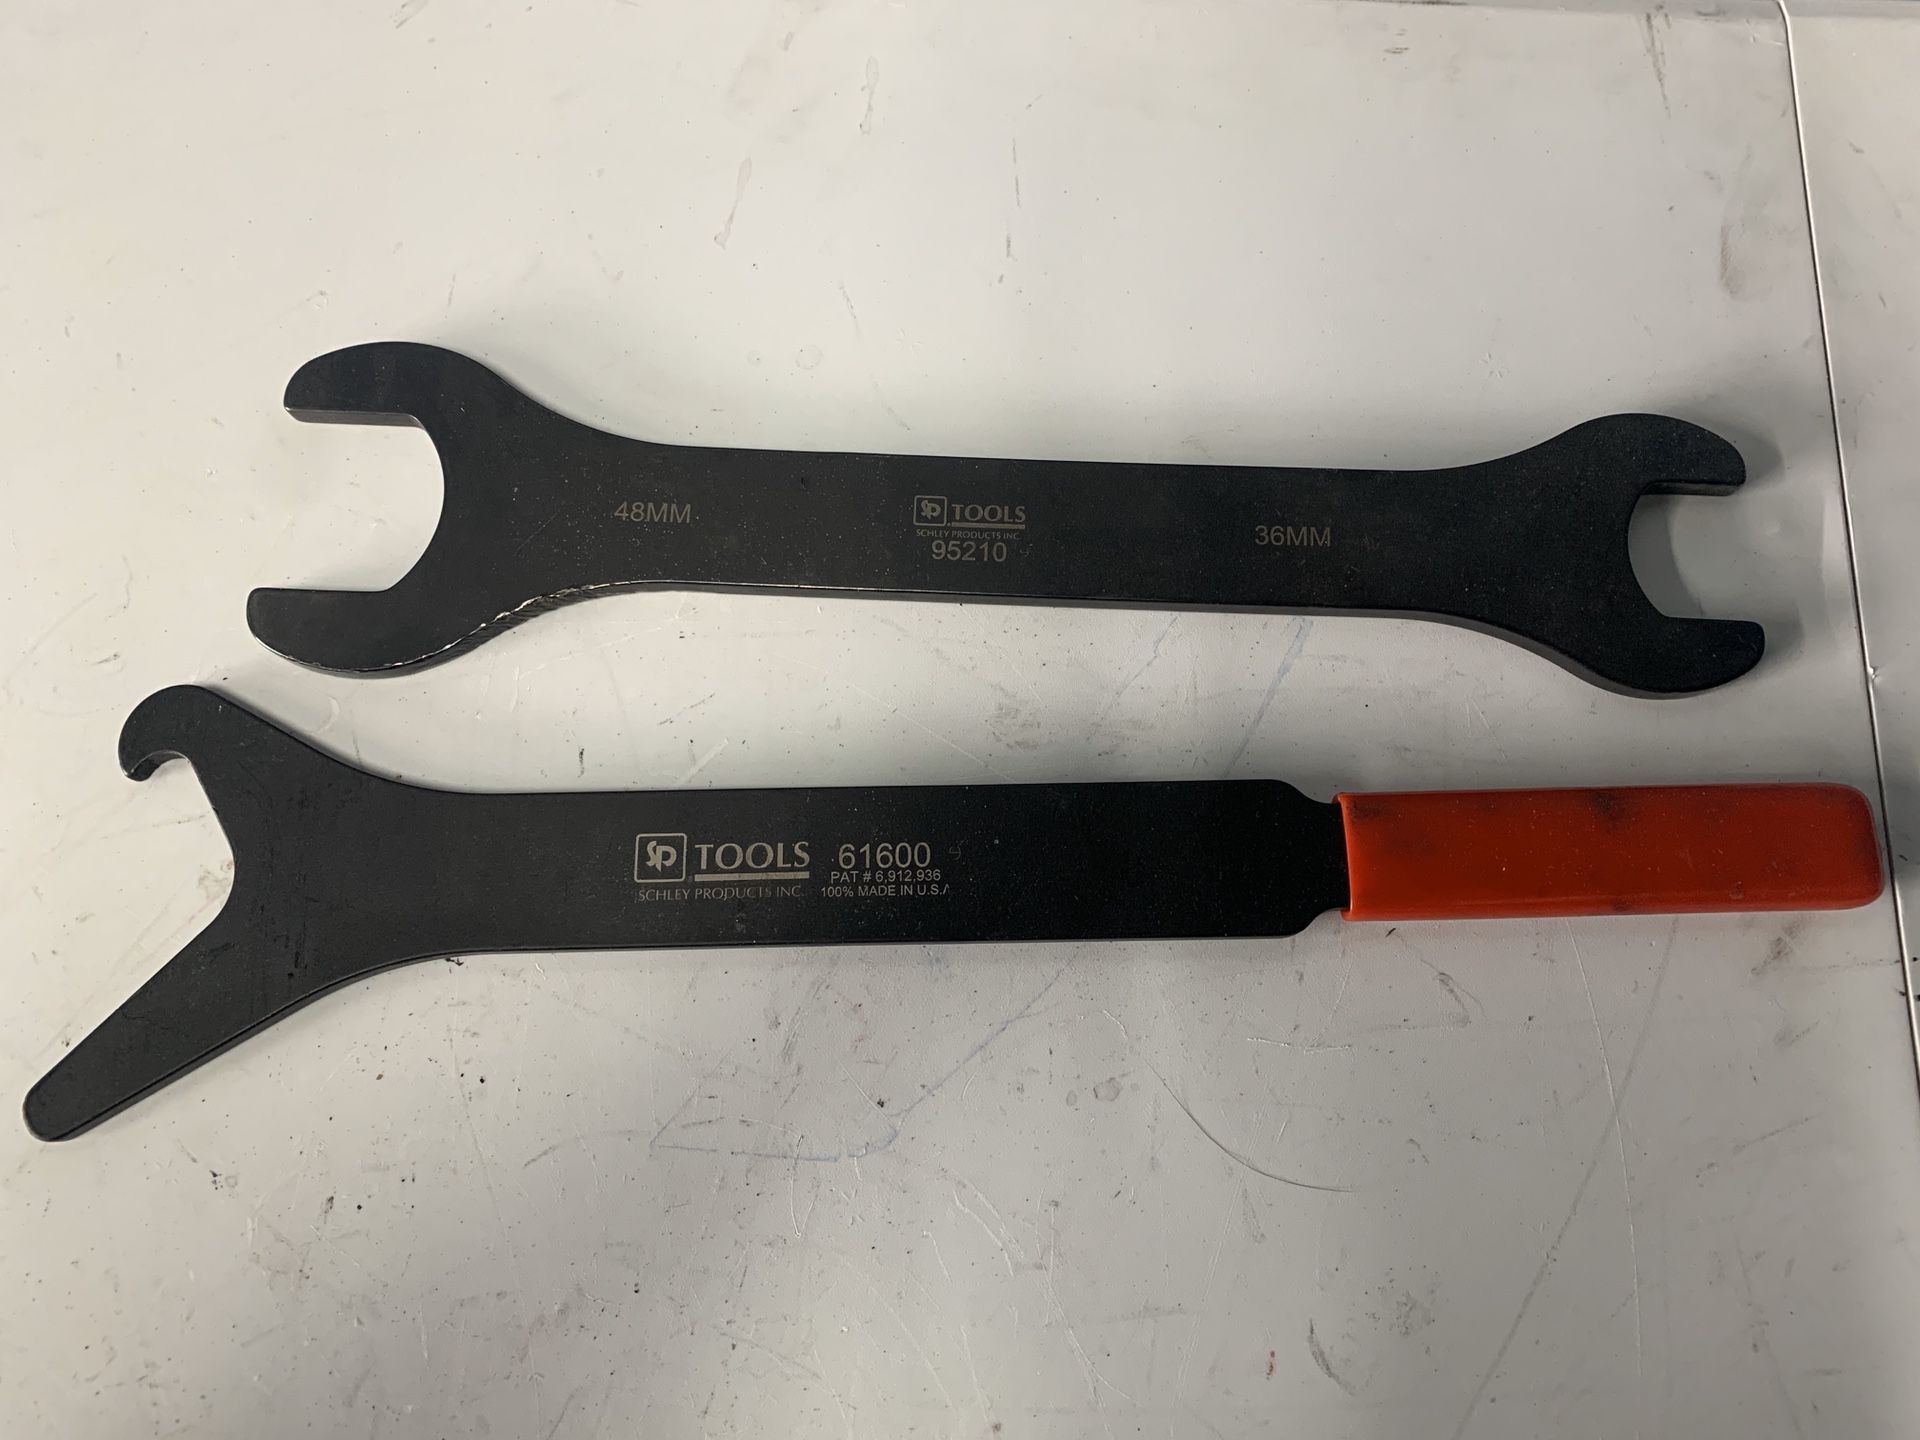 Universal Fan Clutch Wrenches